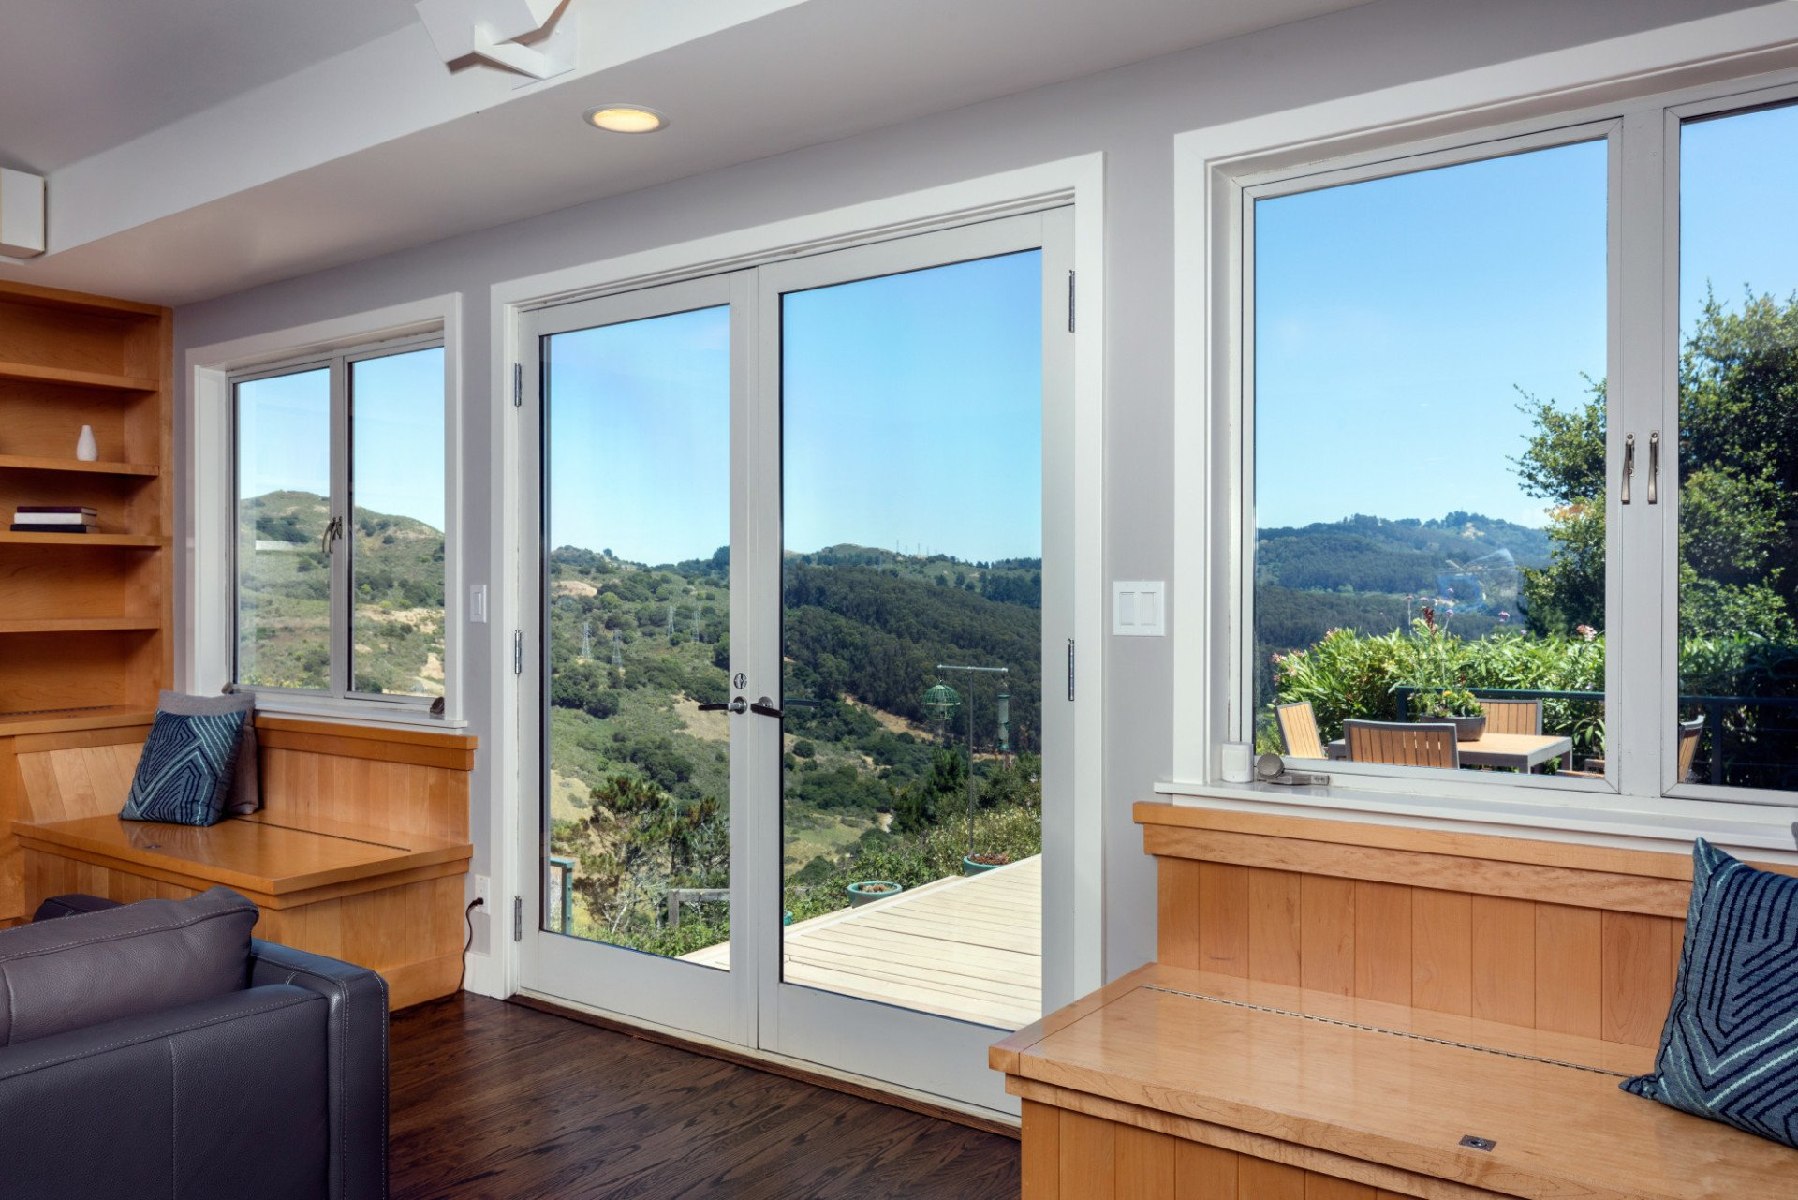 Aluminum vs Vinyl Windows: Which Fits Better in Your Home?